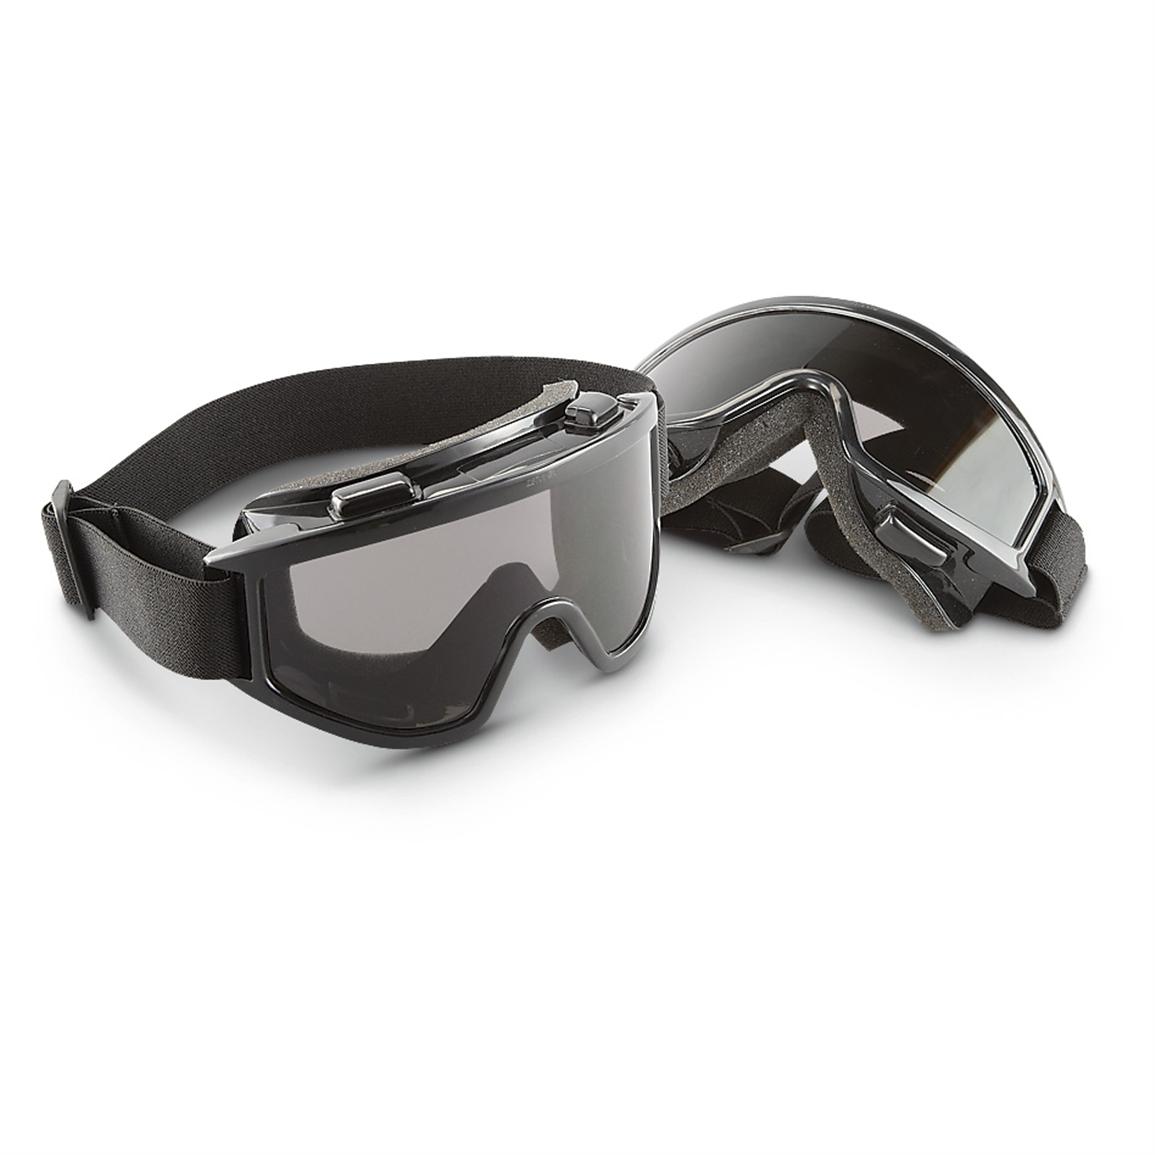 2 Over-glasses Riding Goggles